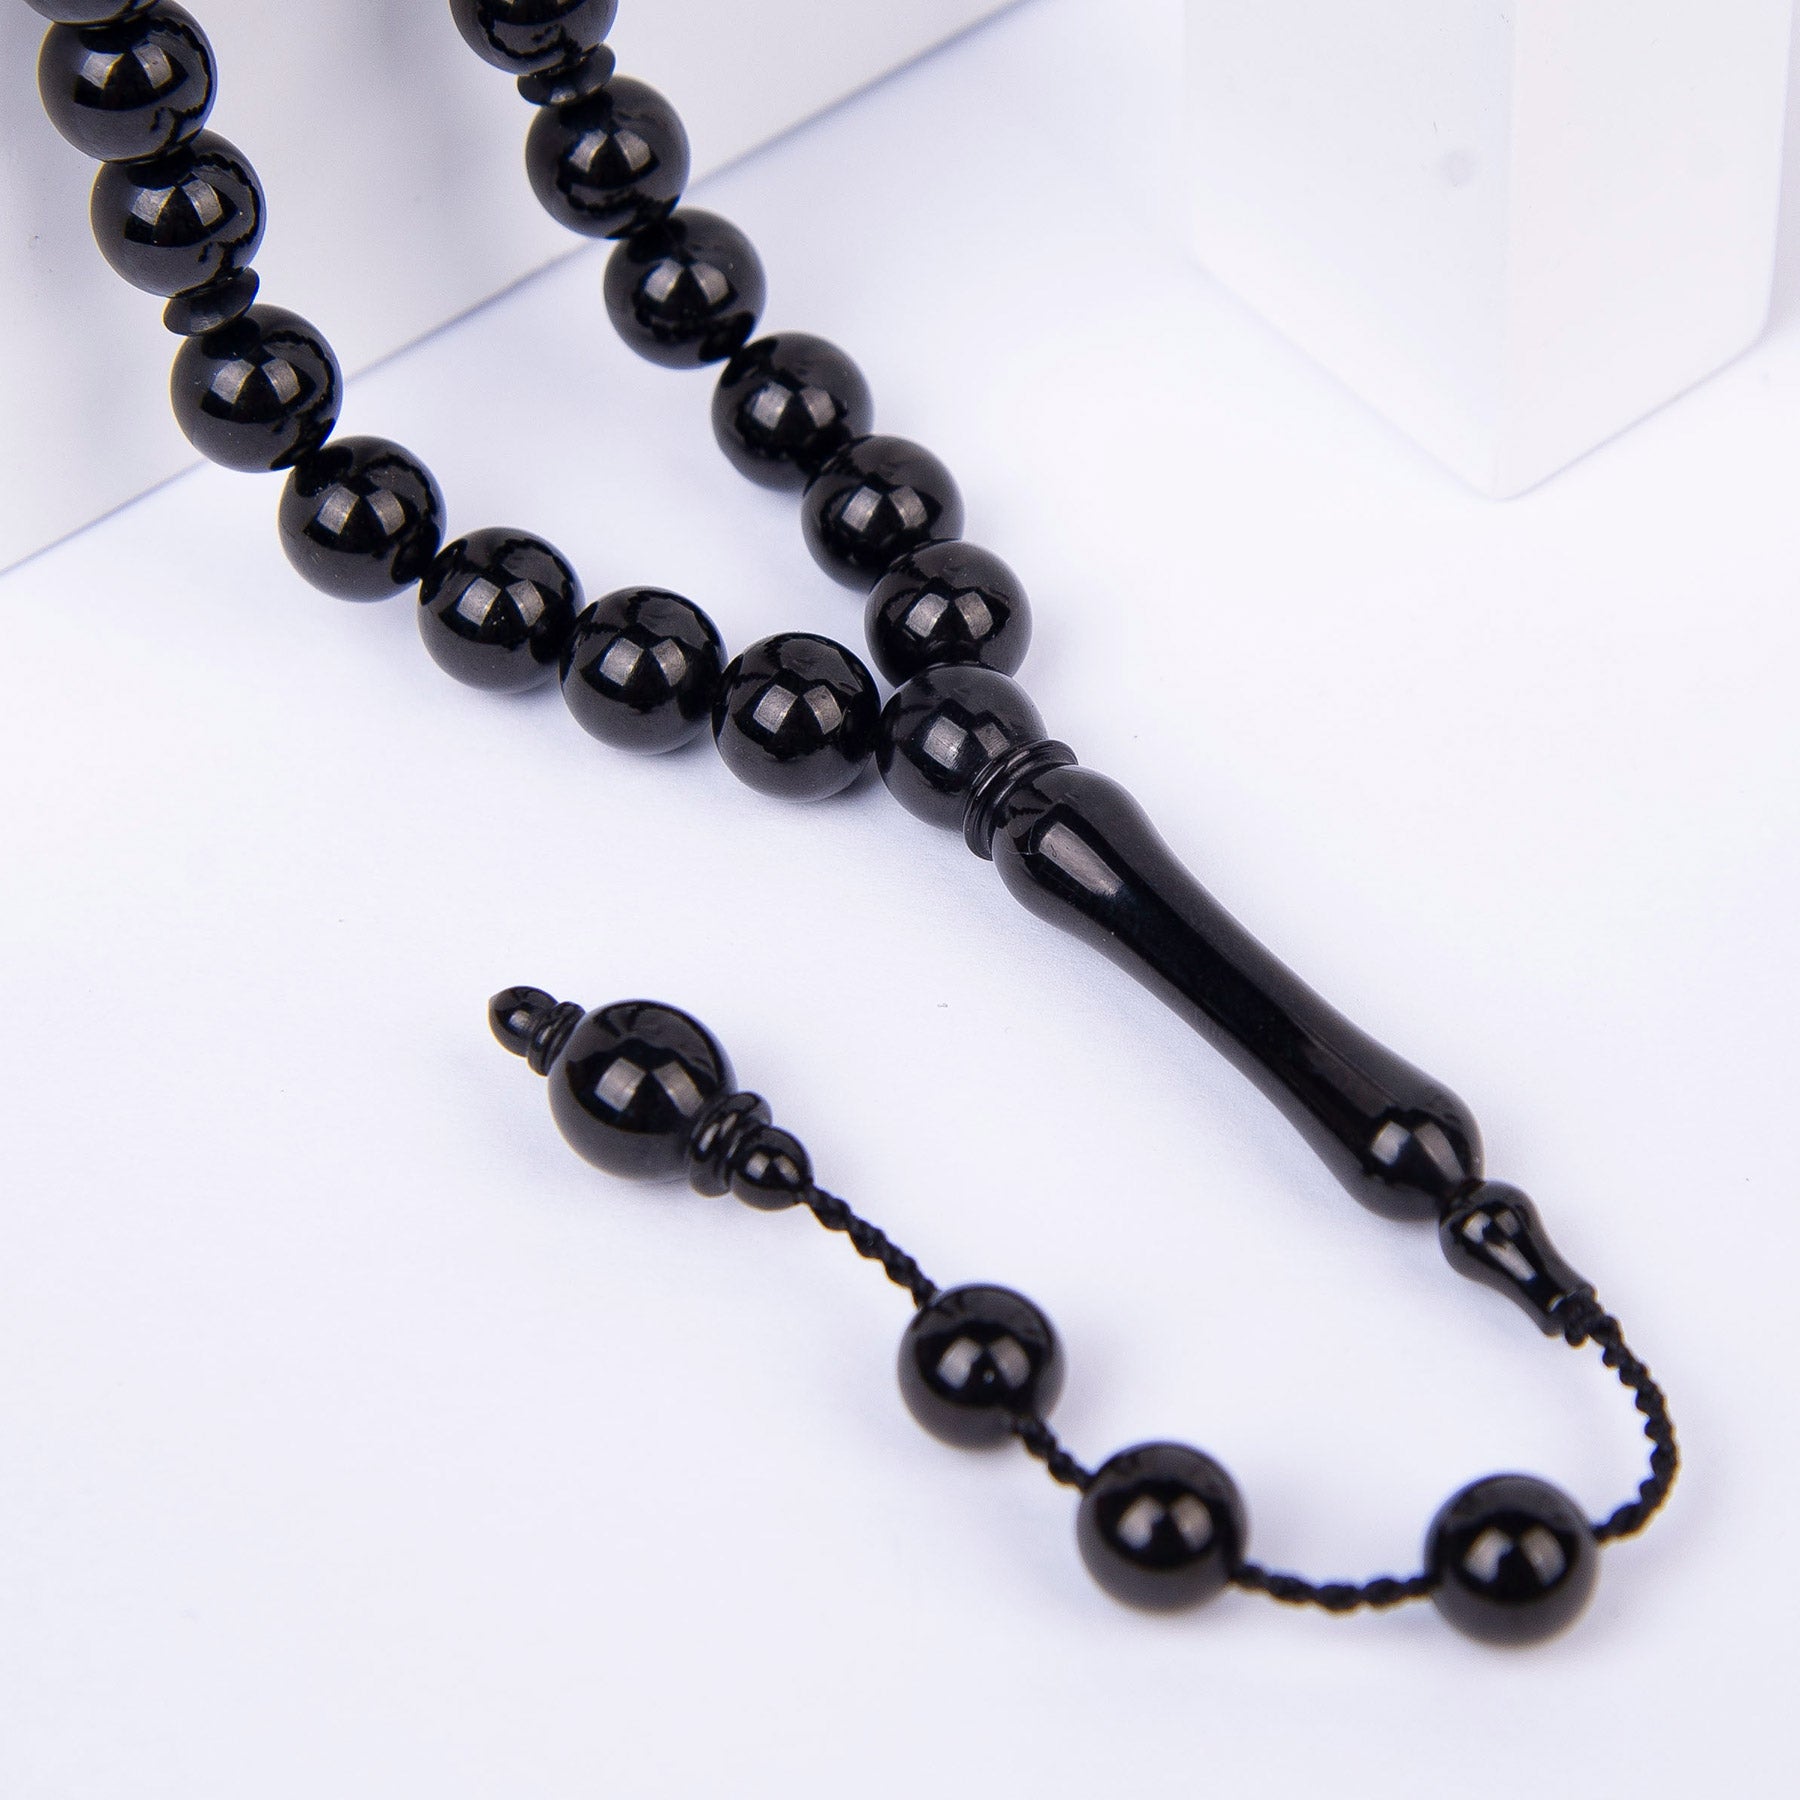 Oltu Stone Prayer Beads with Sphere Cutting System 2